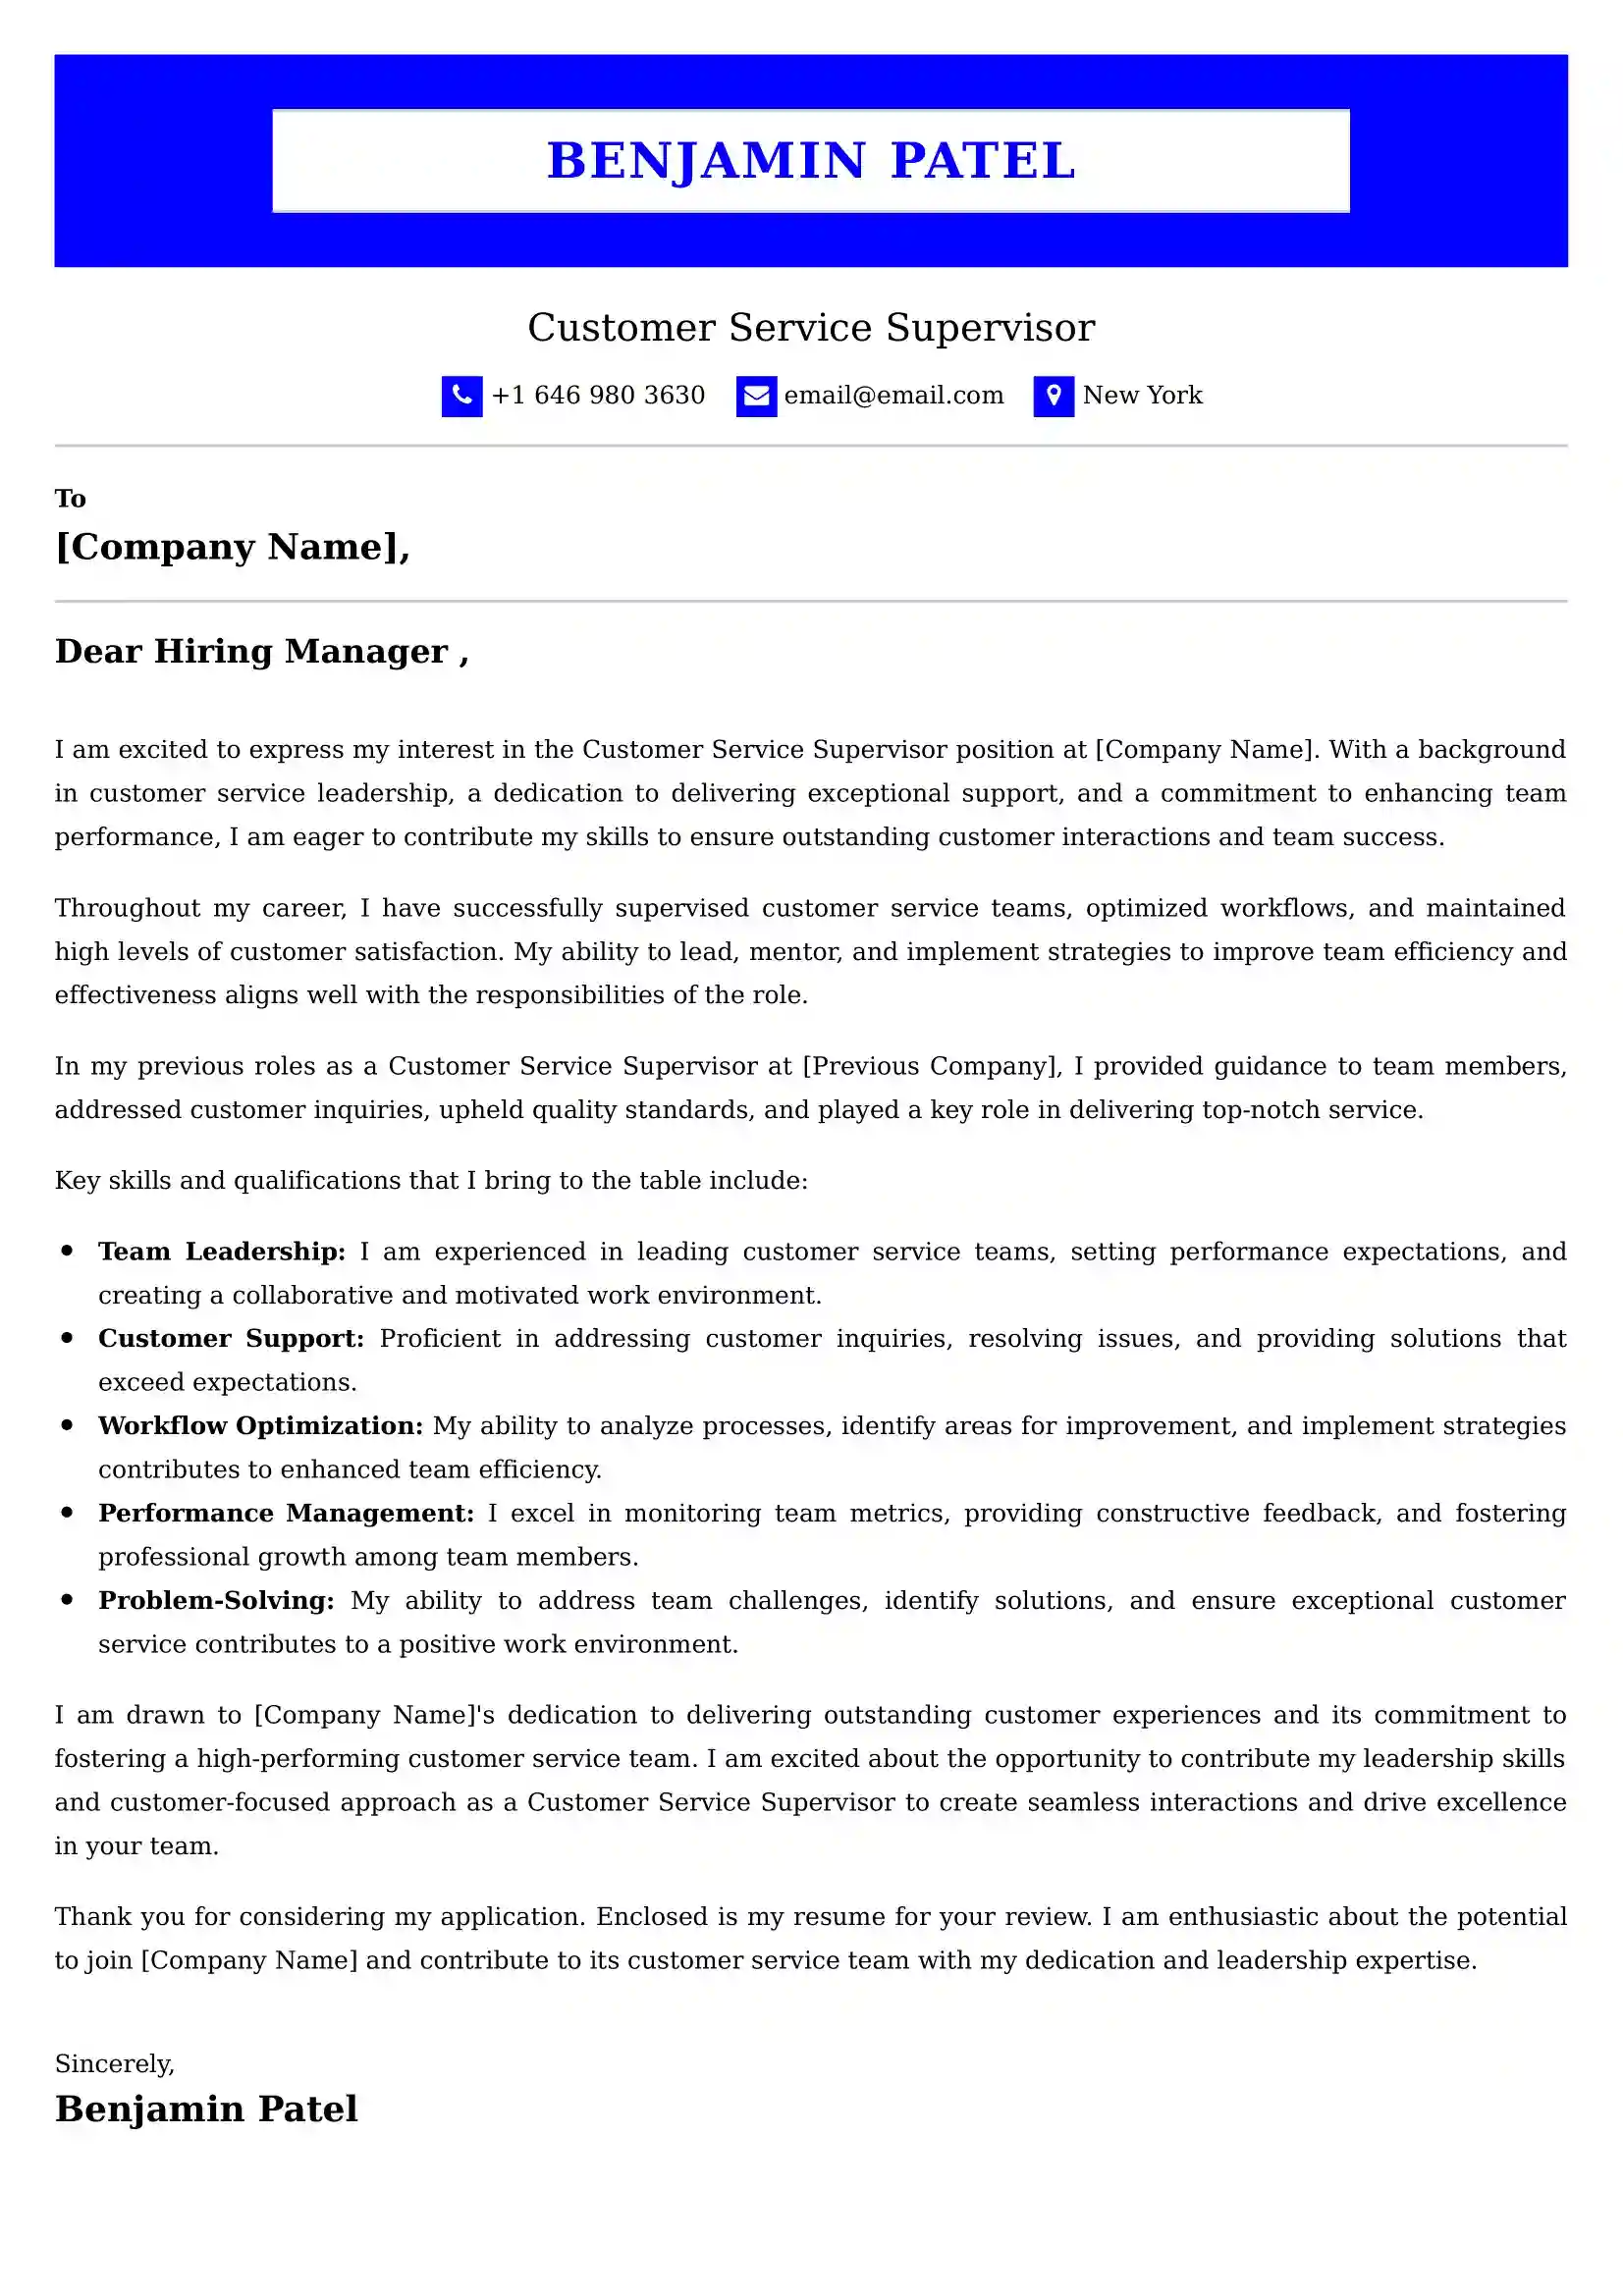 Customer Service Supervisor Cover Letter Examples - US Format and Tips